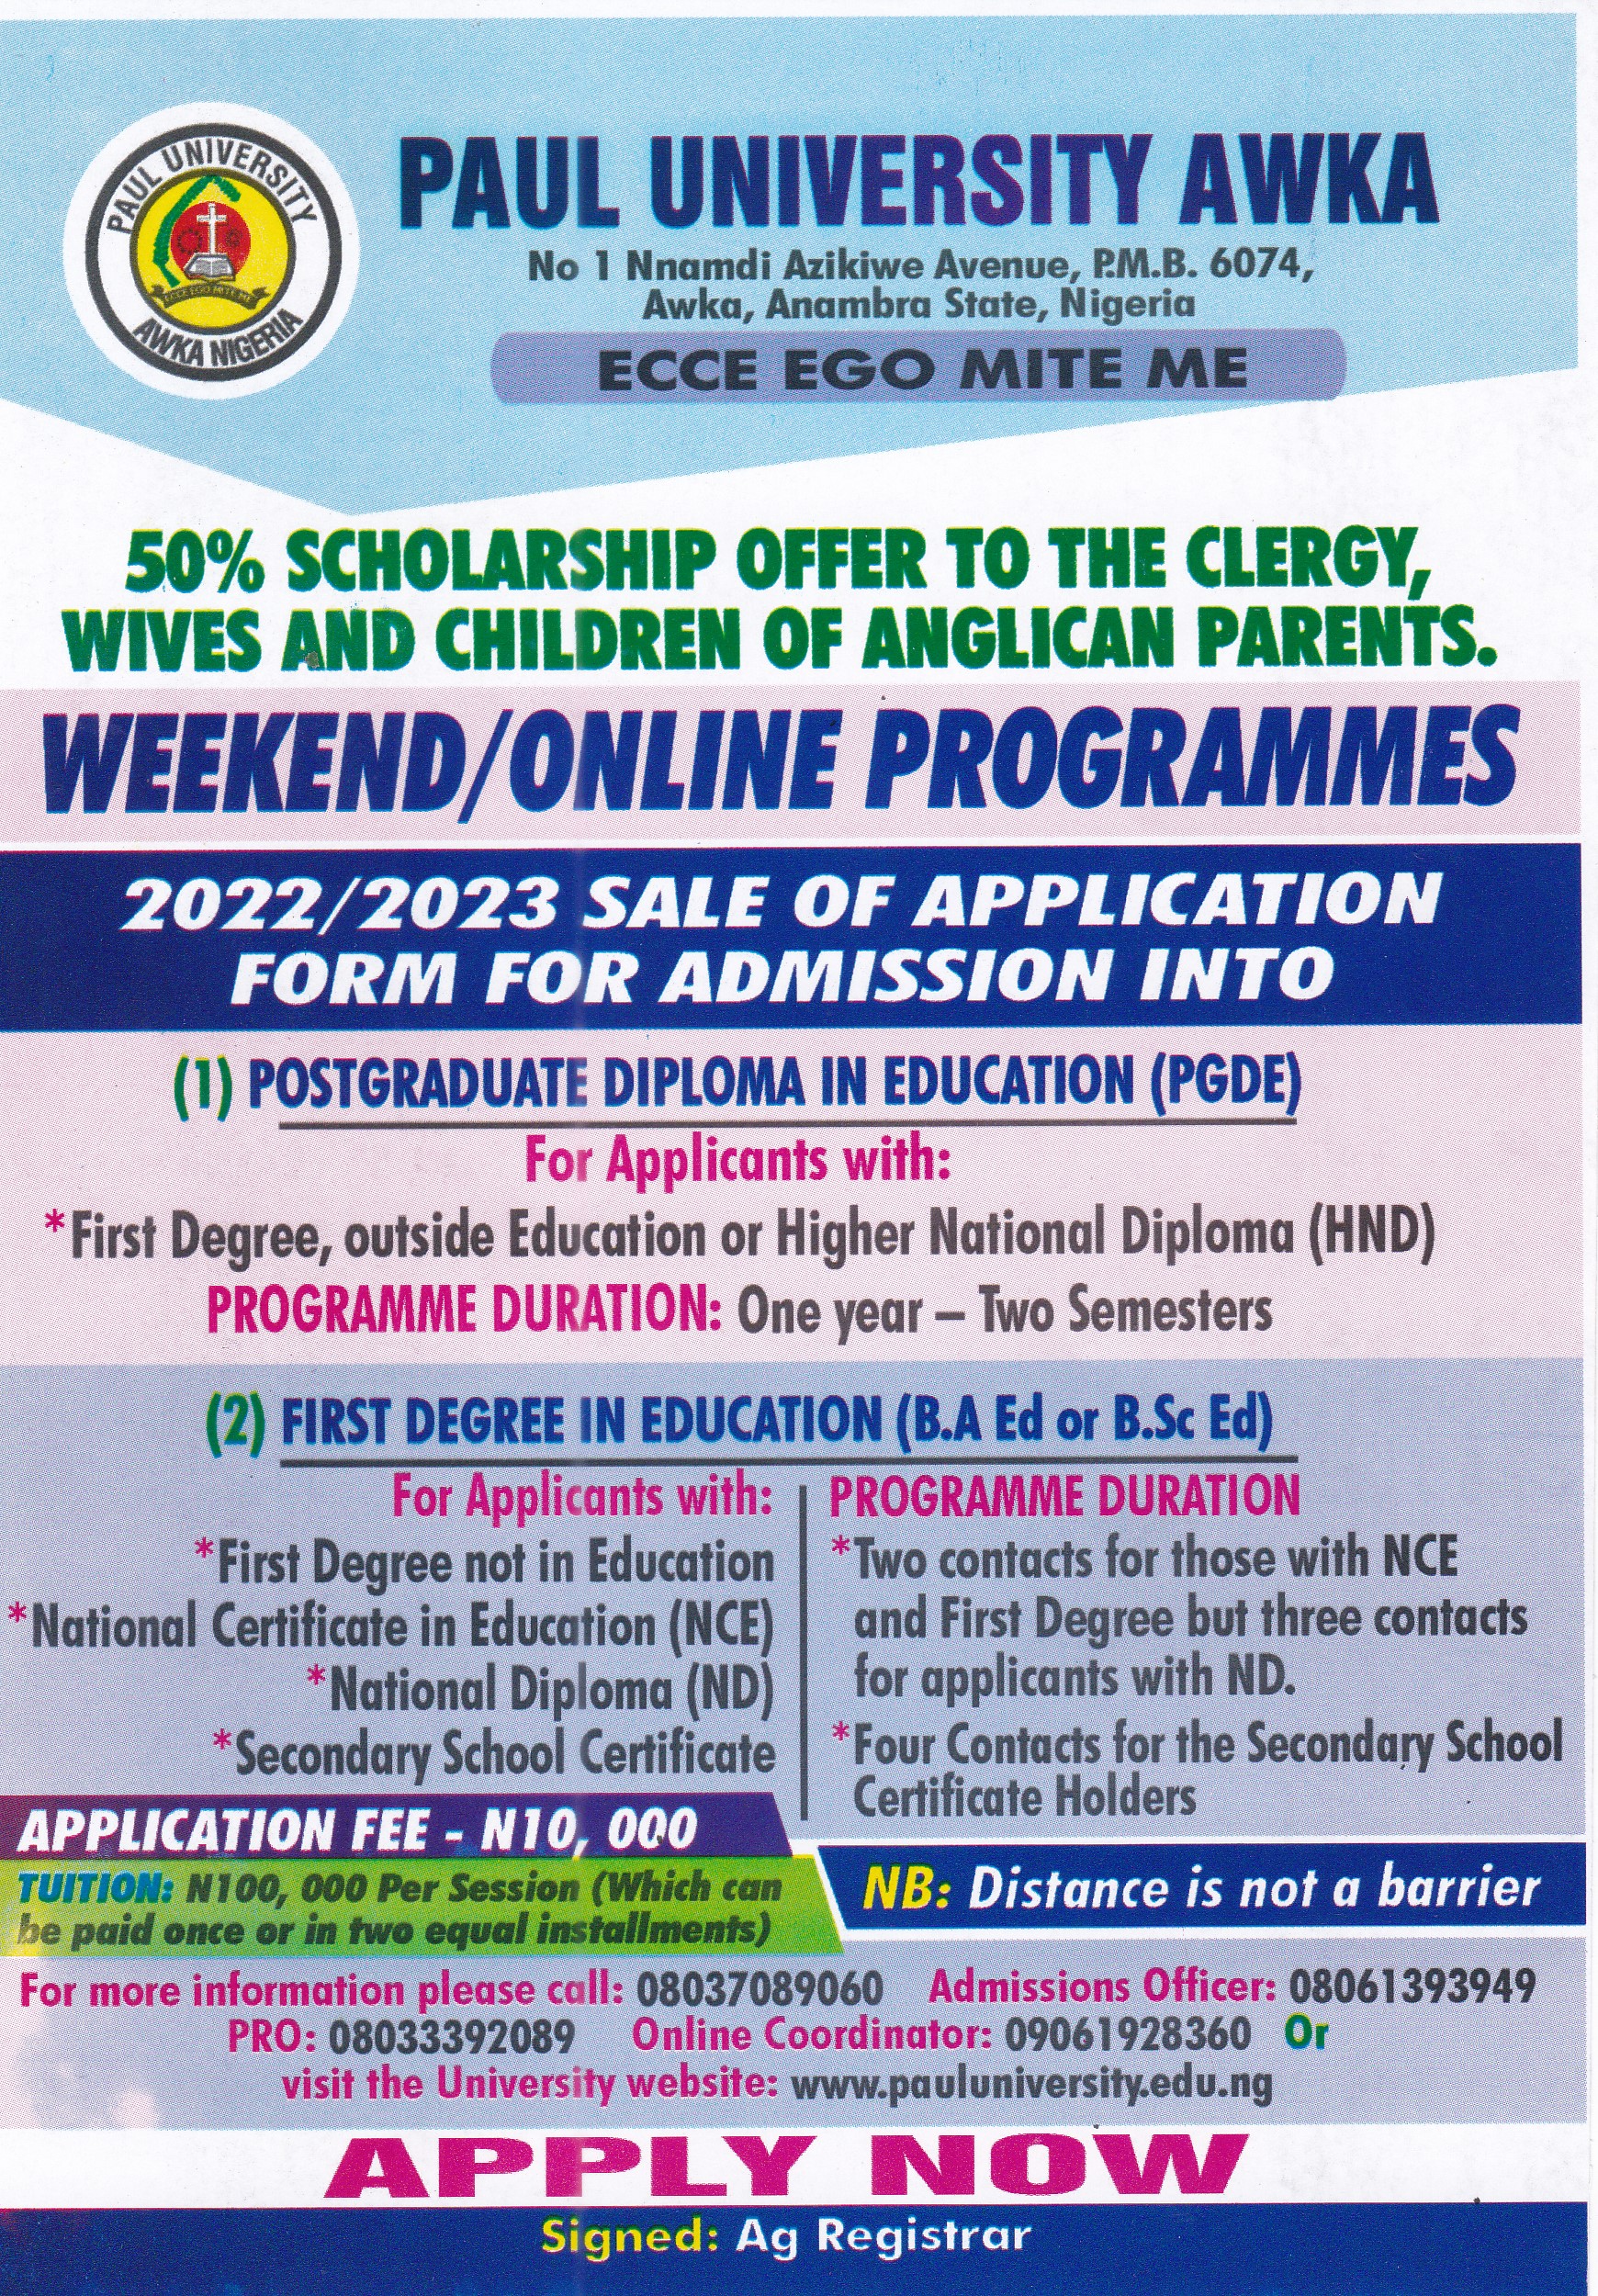 50% SHOLARSHIP OFFER TO THE CLERGY, WIVES AND CHILDREN OF ANGLICAN PARENTS.